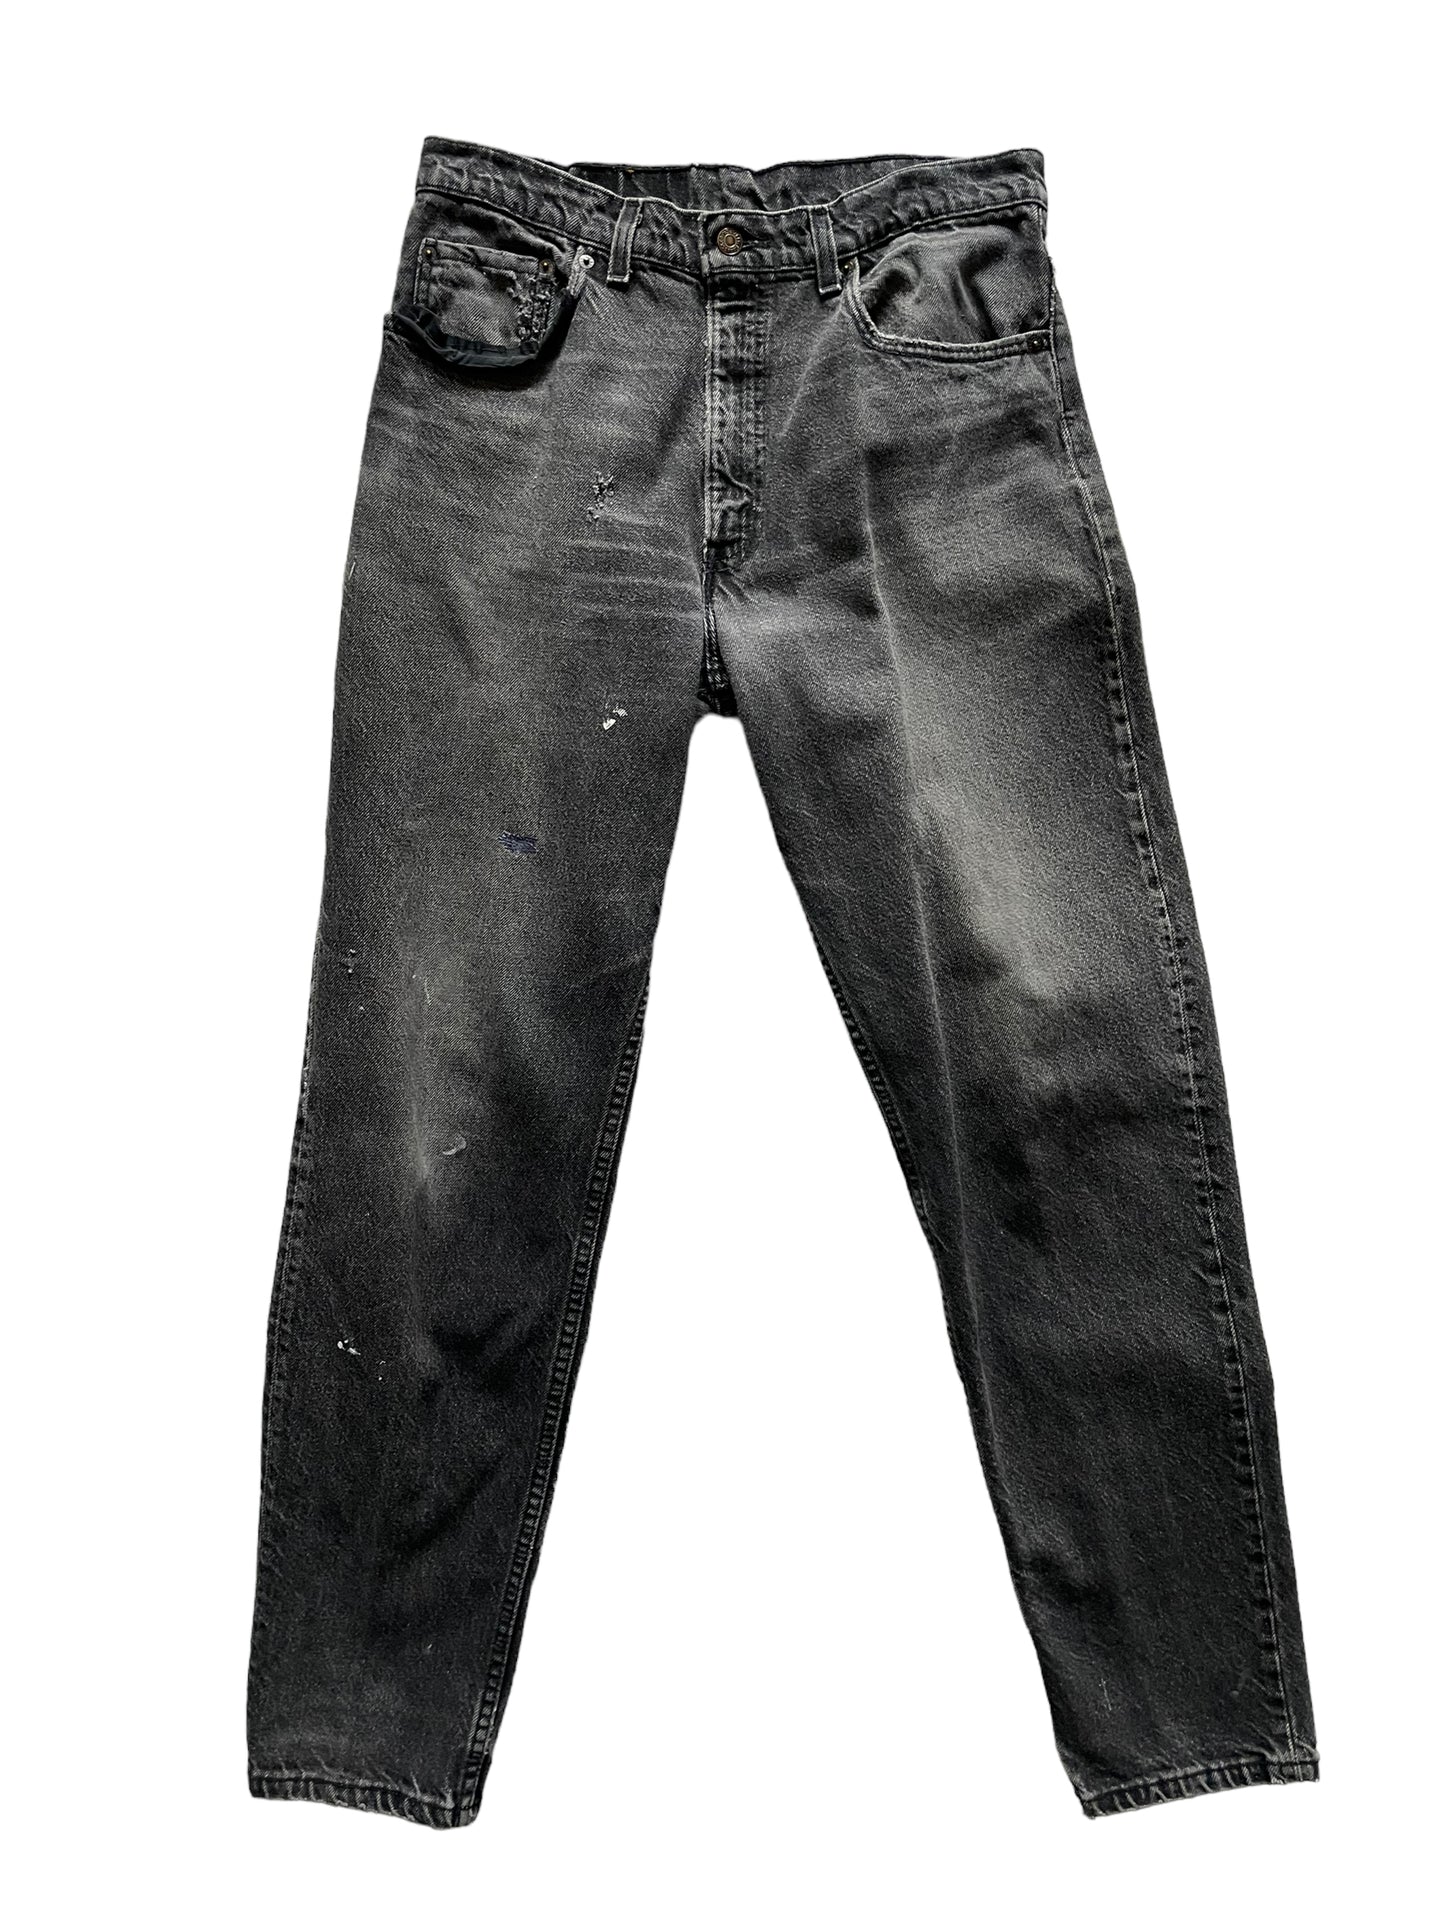 Full front view of Vintage USA Mended Black Levi's 550s 33x34 